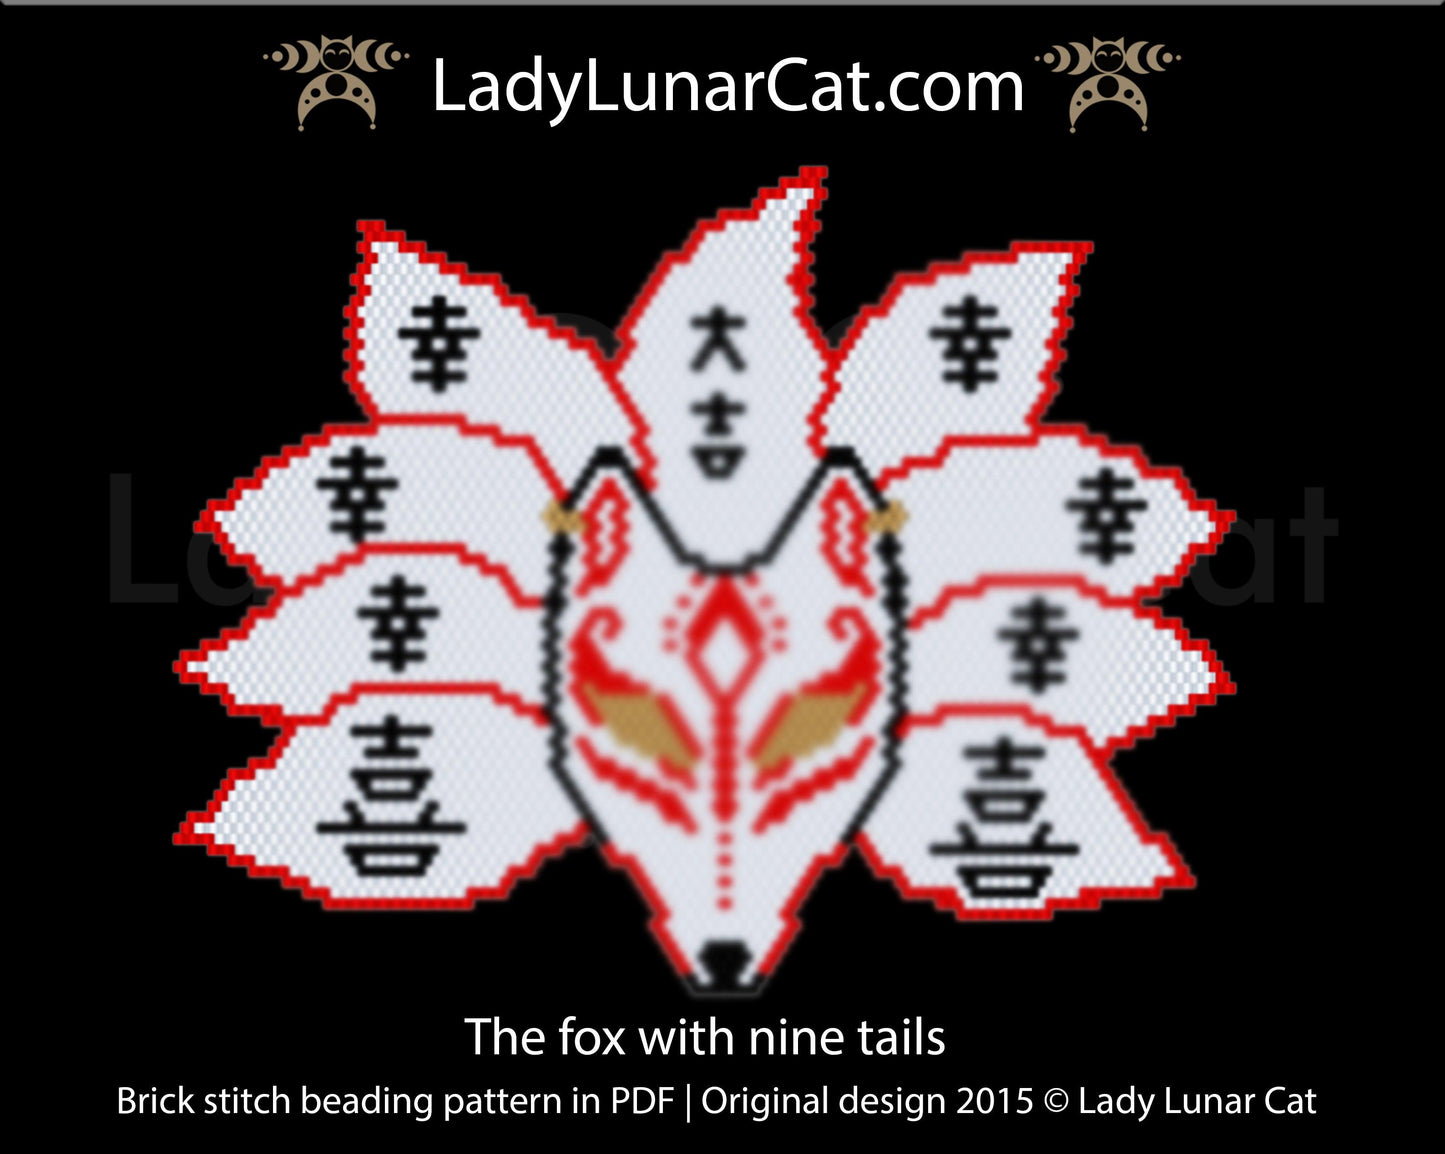 Brick stitch pattern for beading The fox with nine tails LadyLunarCat